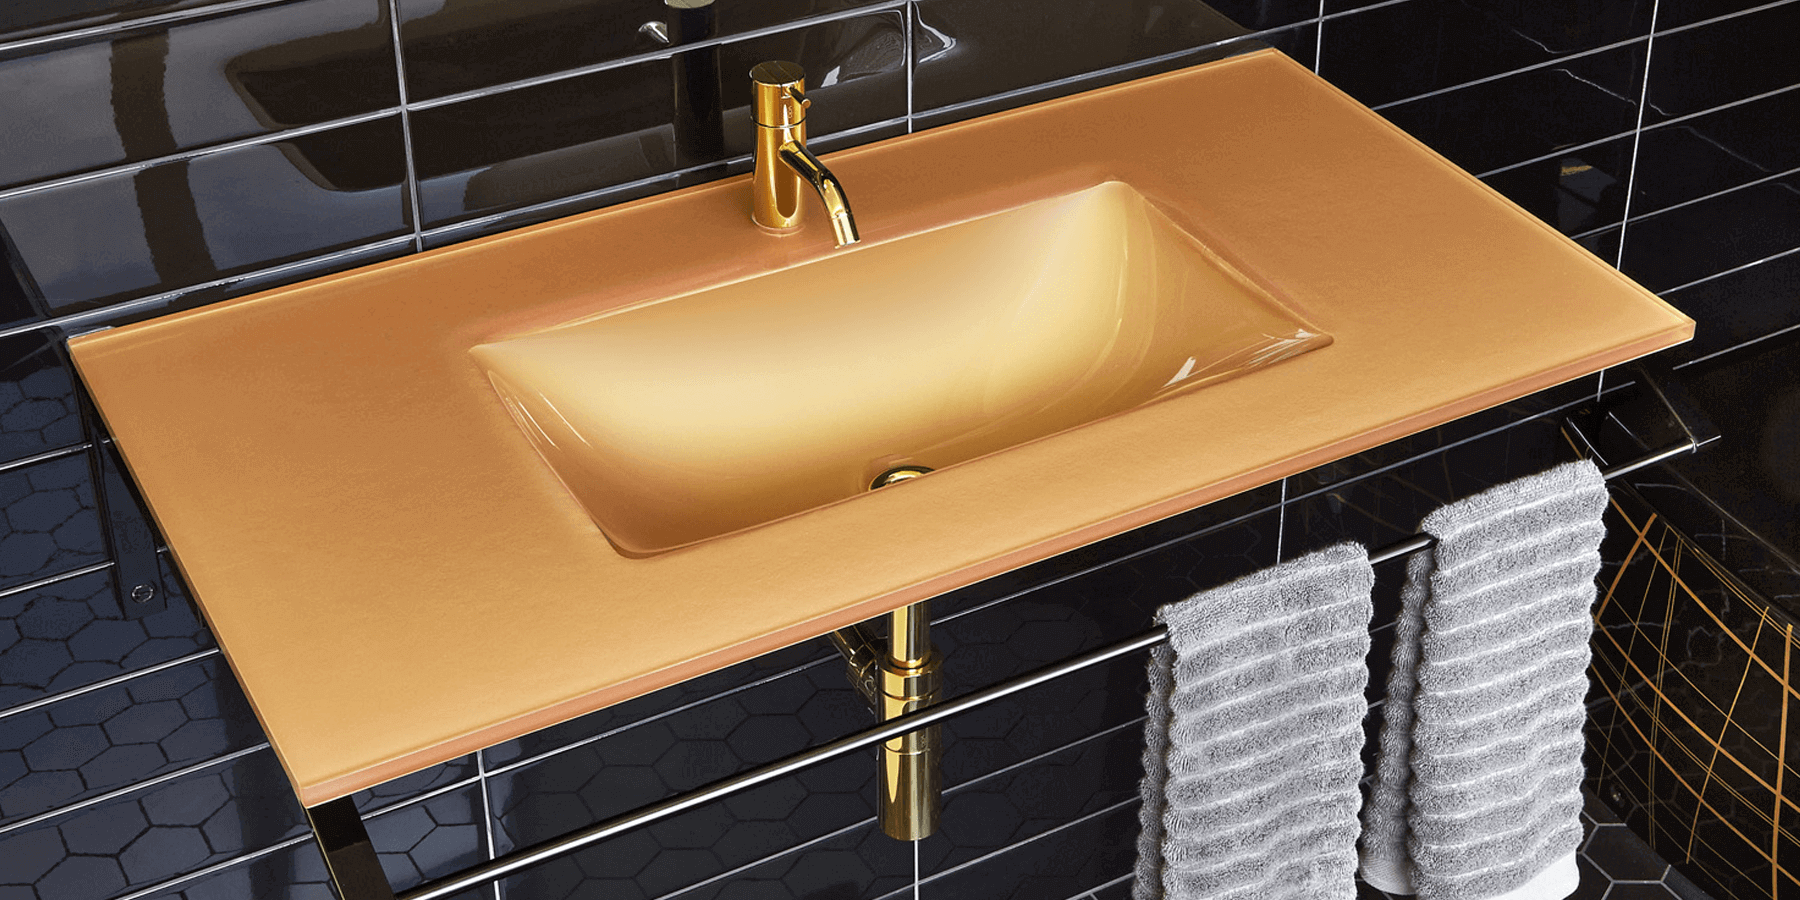 A gold-colored glass basin with a brass faucet